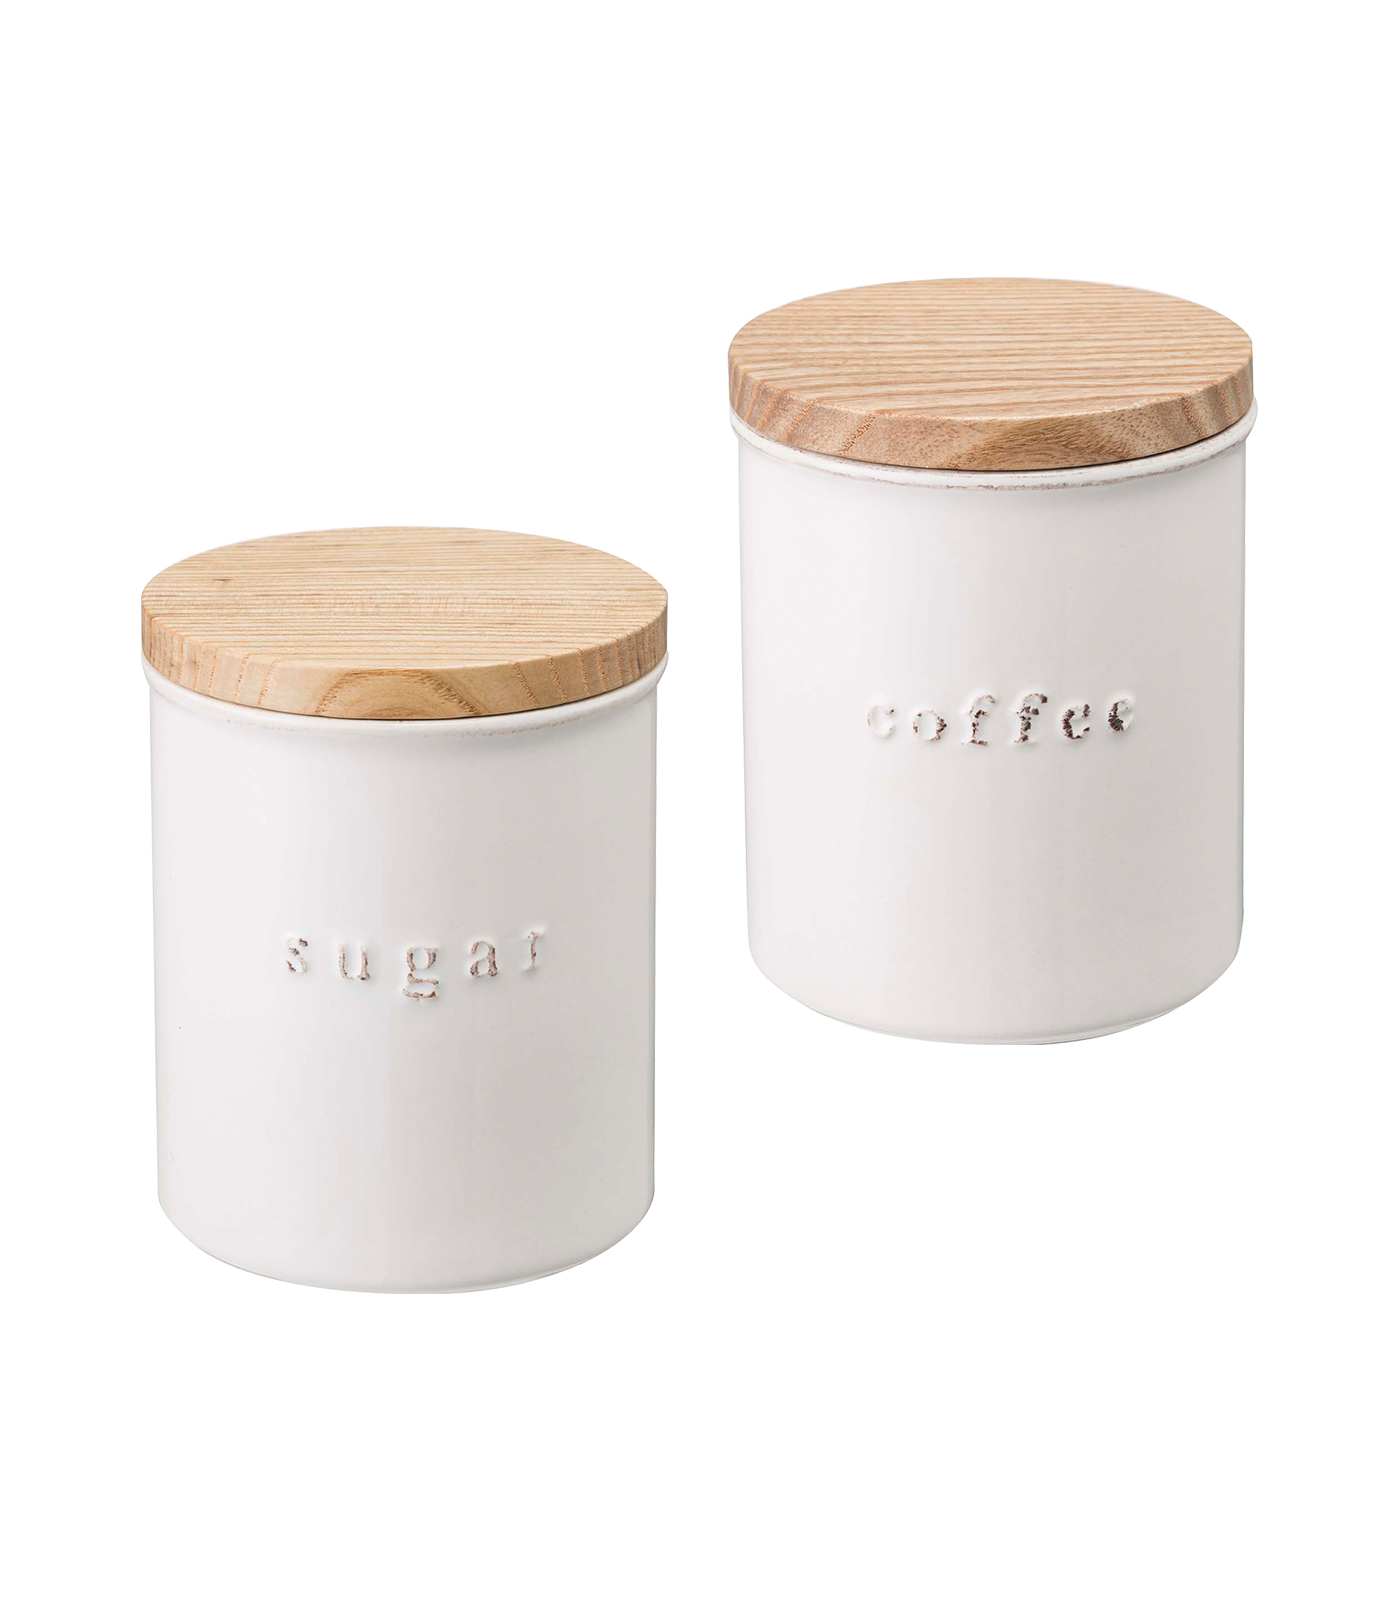 Ceramic-Coffee-and-Sugar-Canisters-Food-Storage